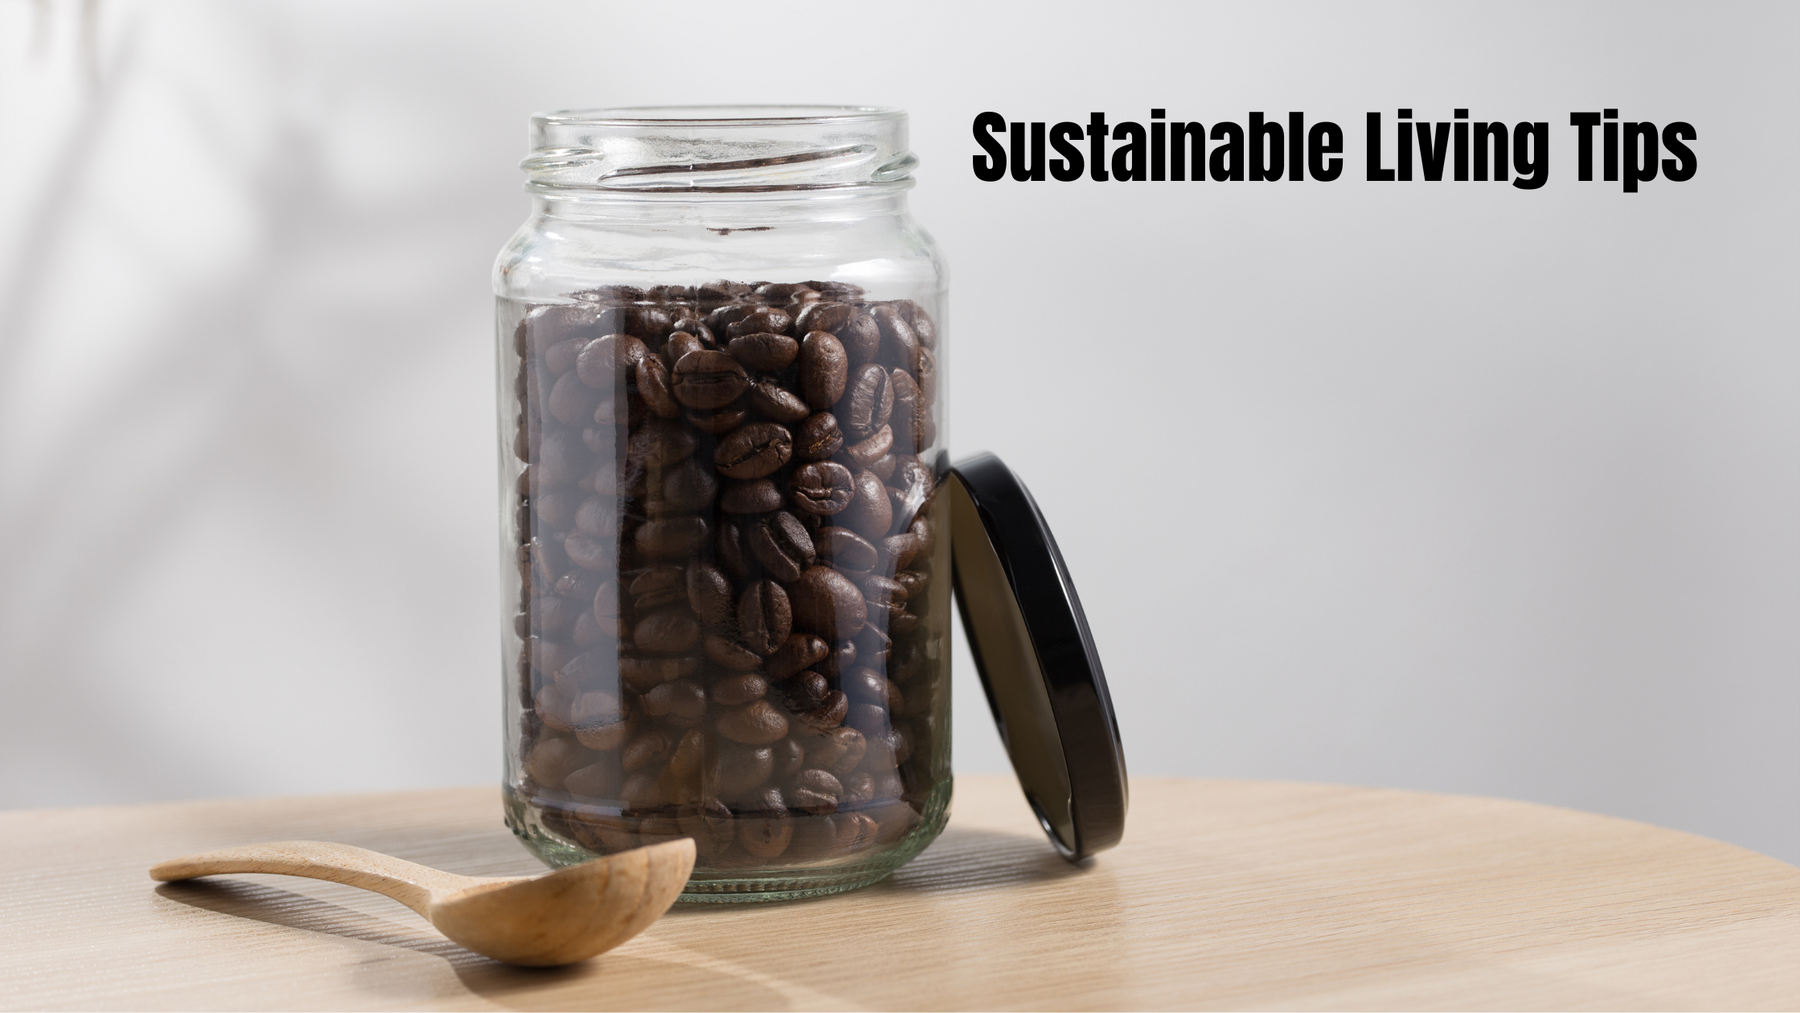 Sustainable Living Tips: Incorporating Graina Products into Your Lifestyle